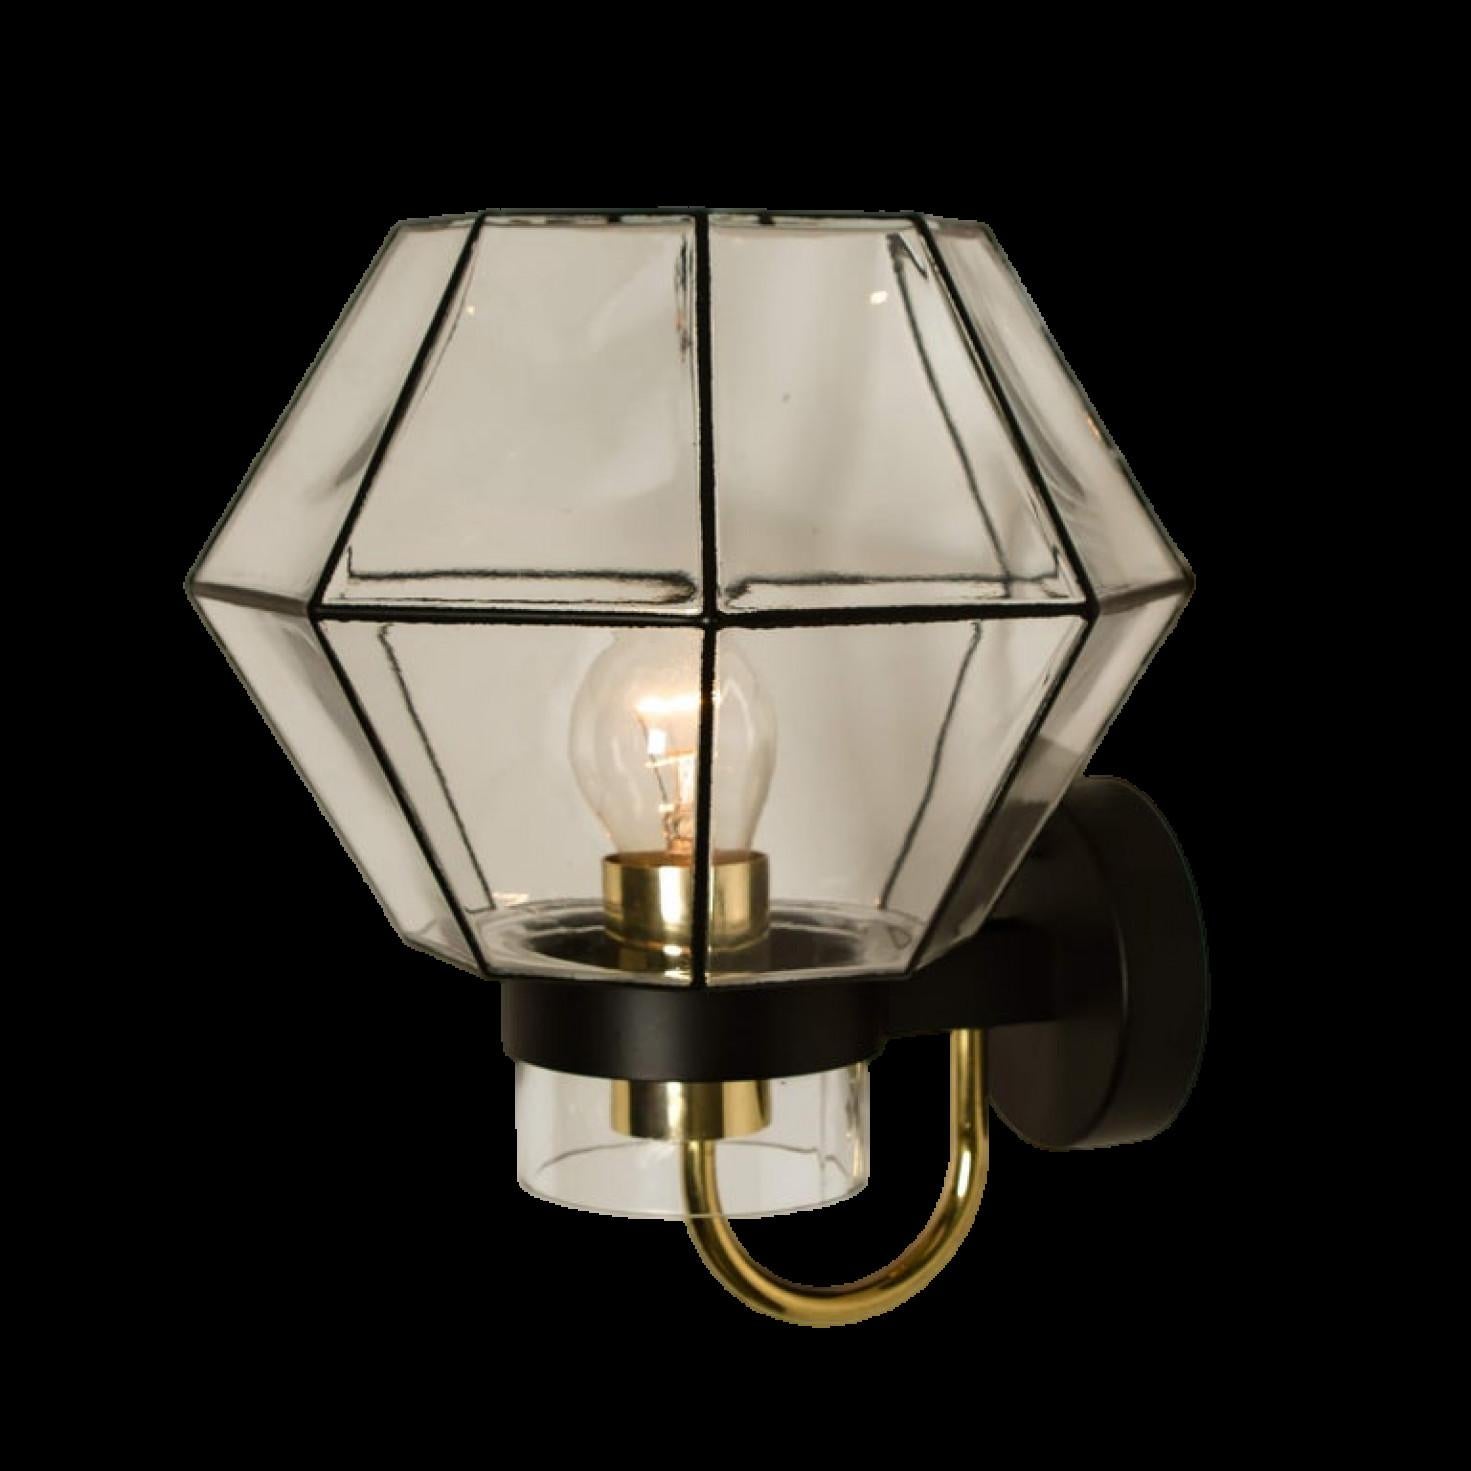 This large set of octagonal glass wall lights were manufactured by Glashütte Limburg in Germany during the 1960s. Minimal geometric design executed with a taste for excellence in craftsmanship. Each lamp, made from elaborate clear glans with